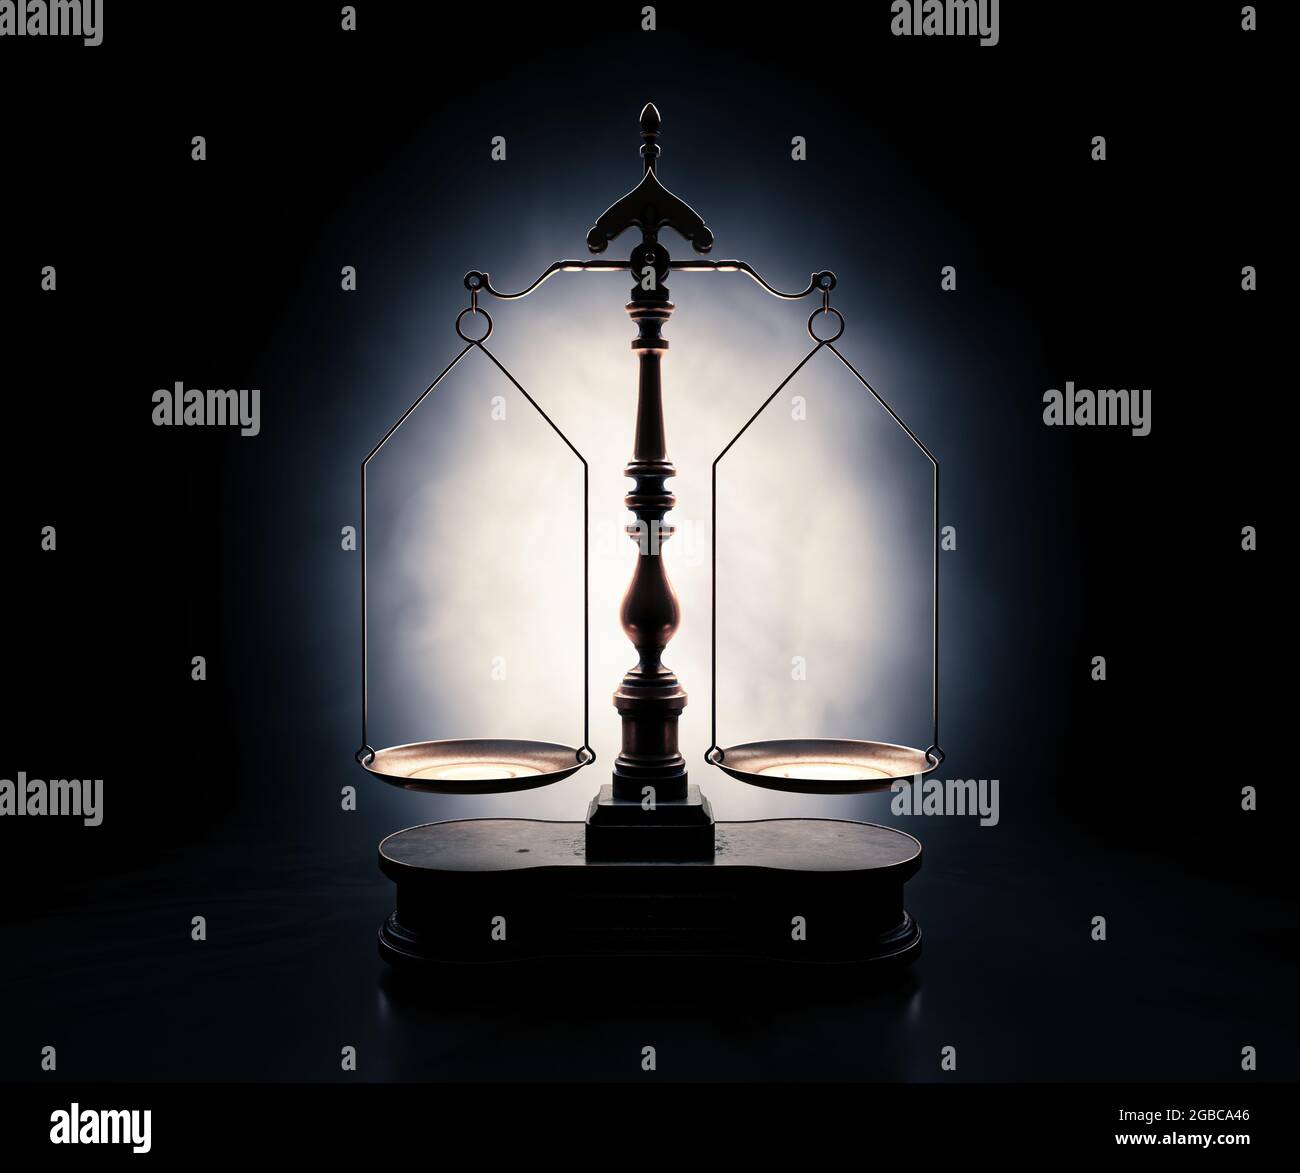 Ornate brass justice scales with a wooden base backlit on a dark moody background - 3D render Stock Photo